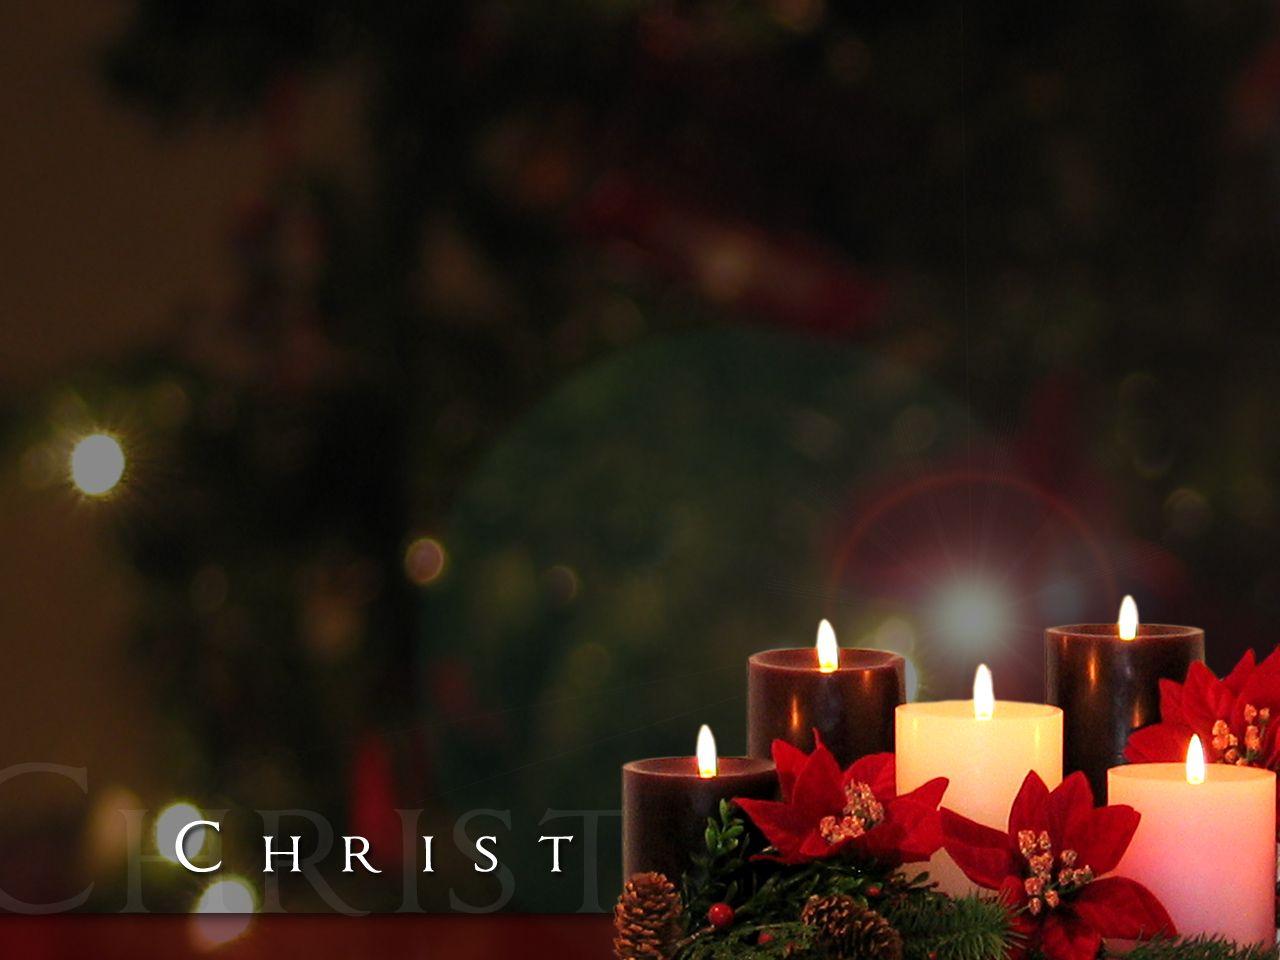 First Sunday Of Advent Wallpaper